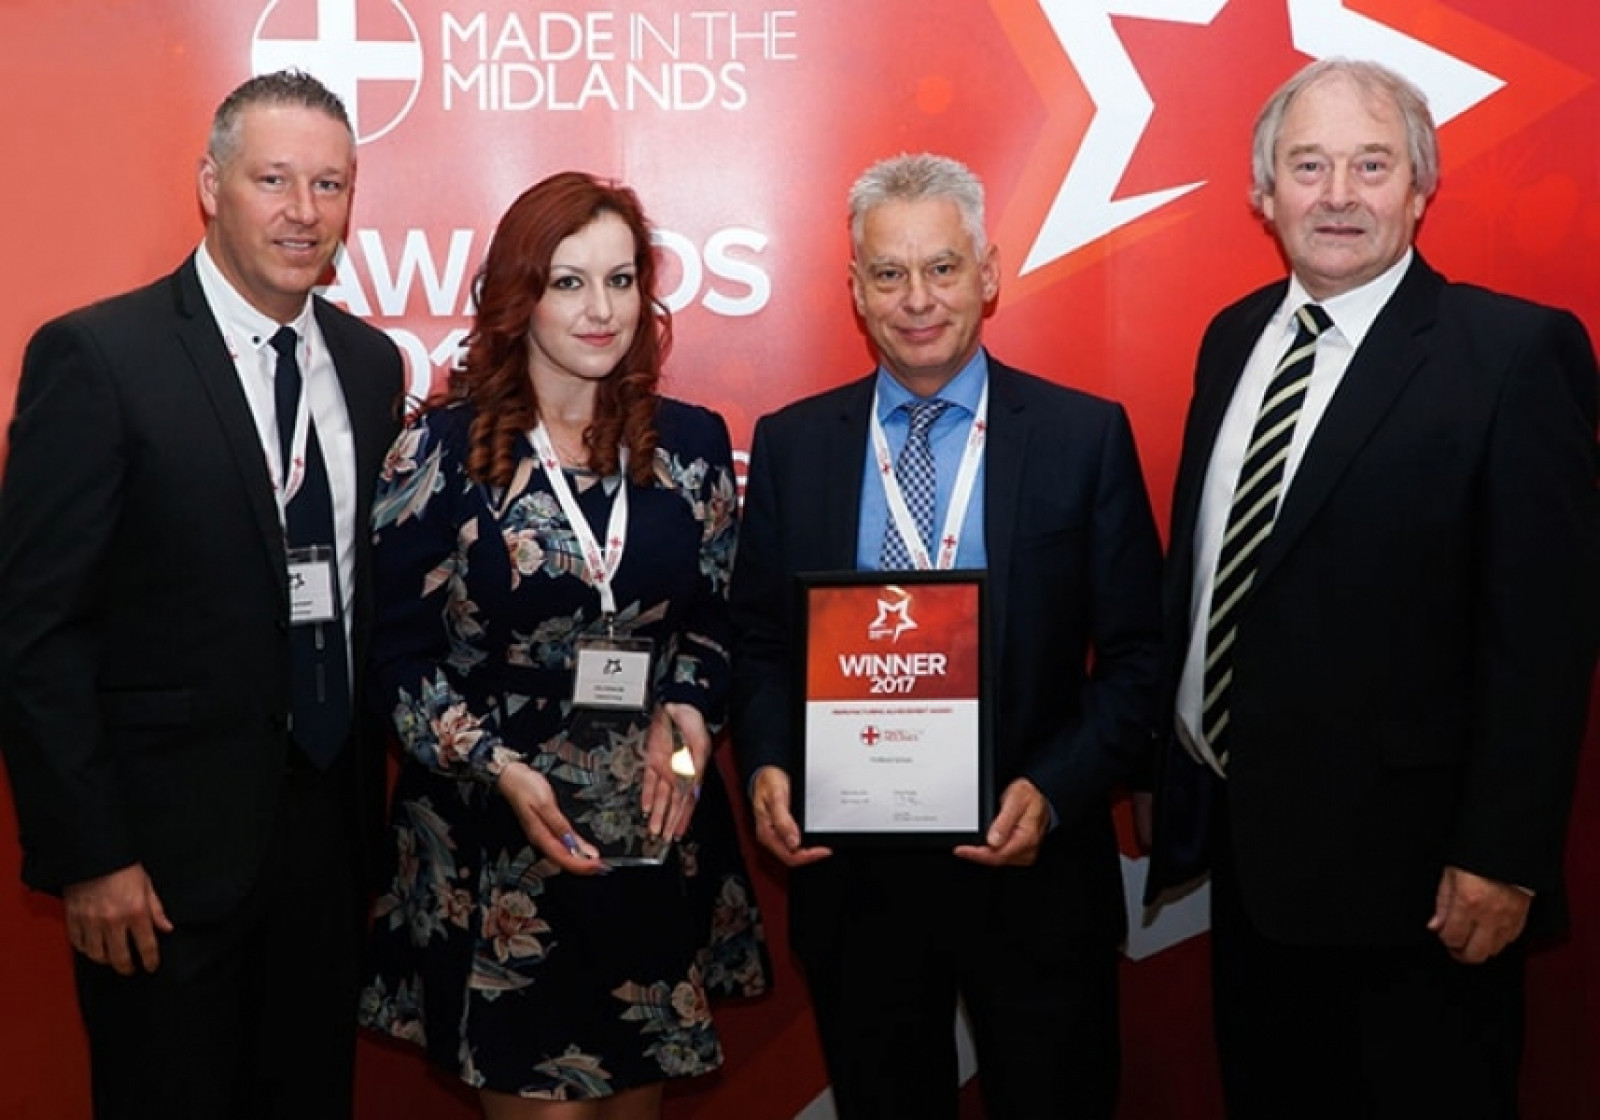 Petford Group crowned Overall Winners at MIM Awards 2017